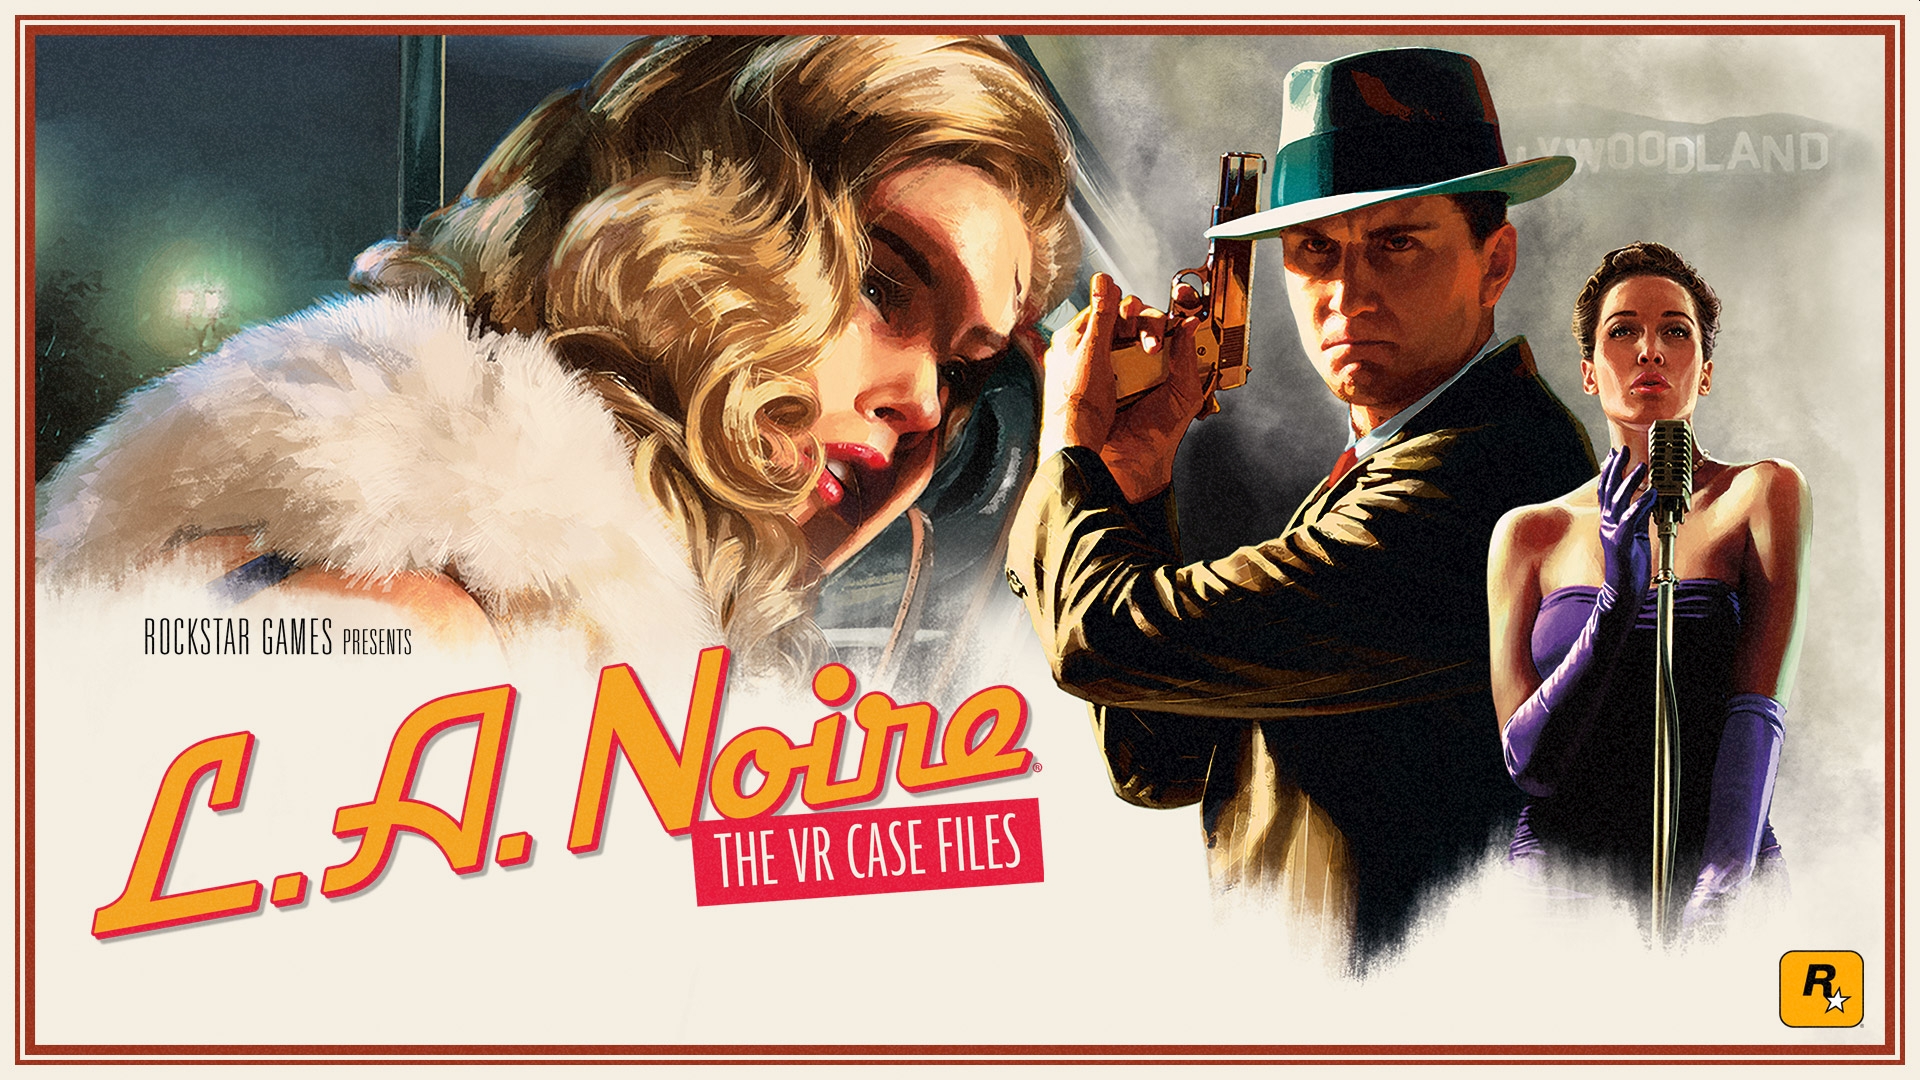 L.A. Noire: The VR Case Files Steam Update Adds Previously PS VR Exclusive Content